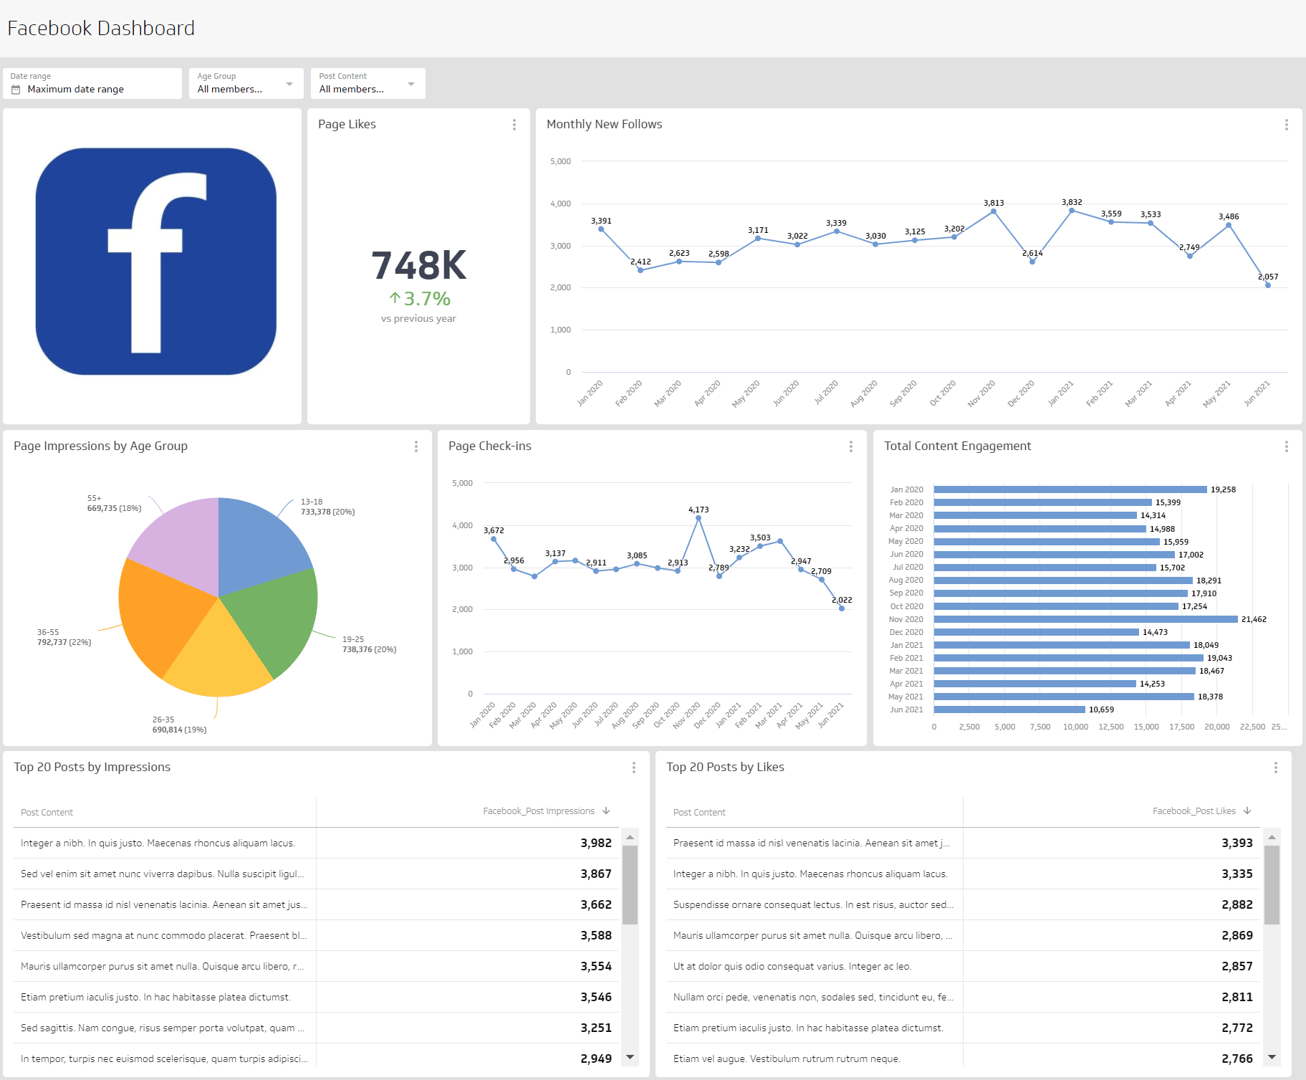 Related Dashboard Examples - Facebook Analytics Dashboard